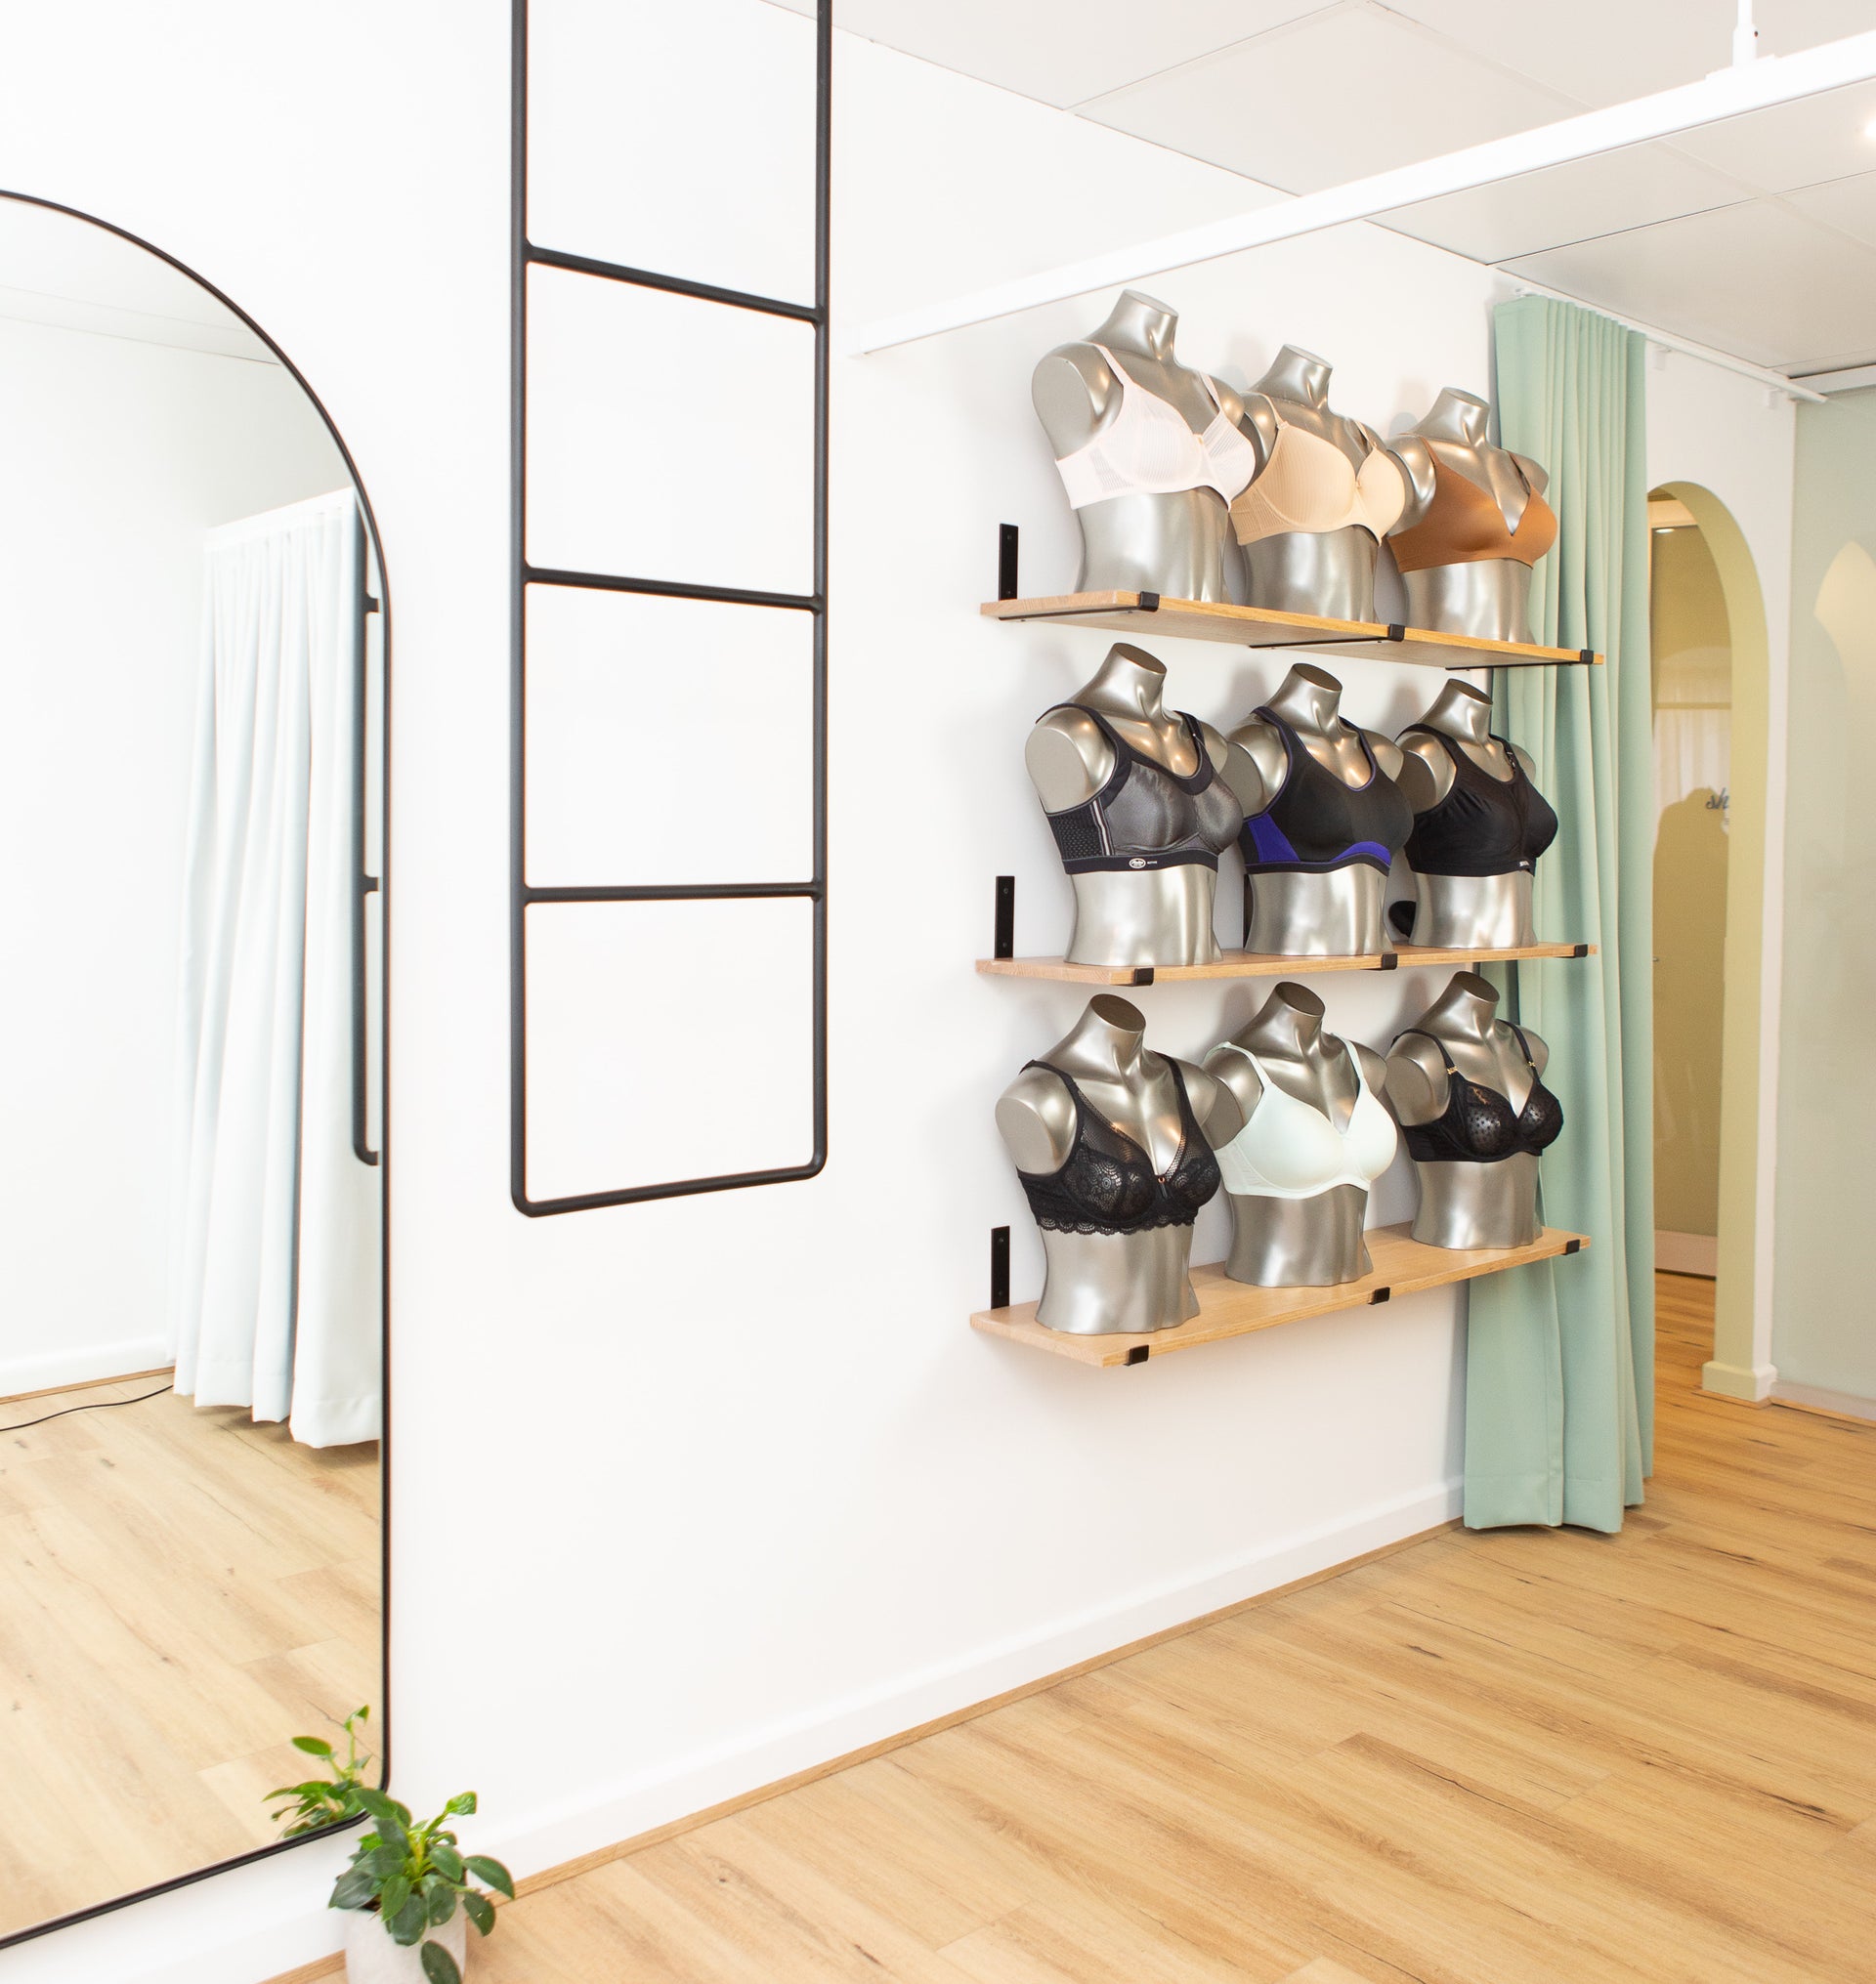 Looking for a Bra Fitting in Melbourne? We have you covered – She Science